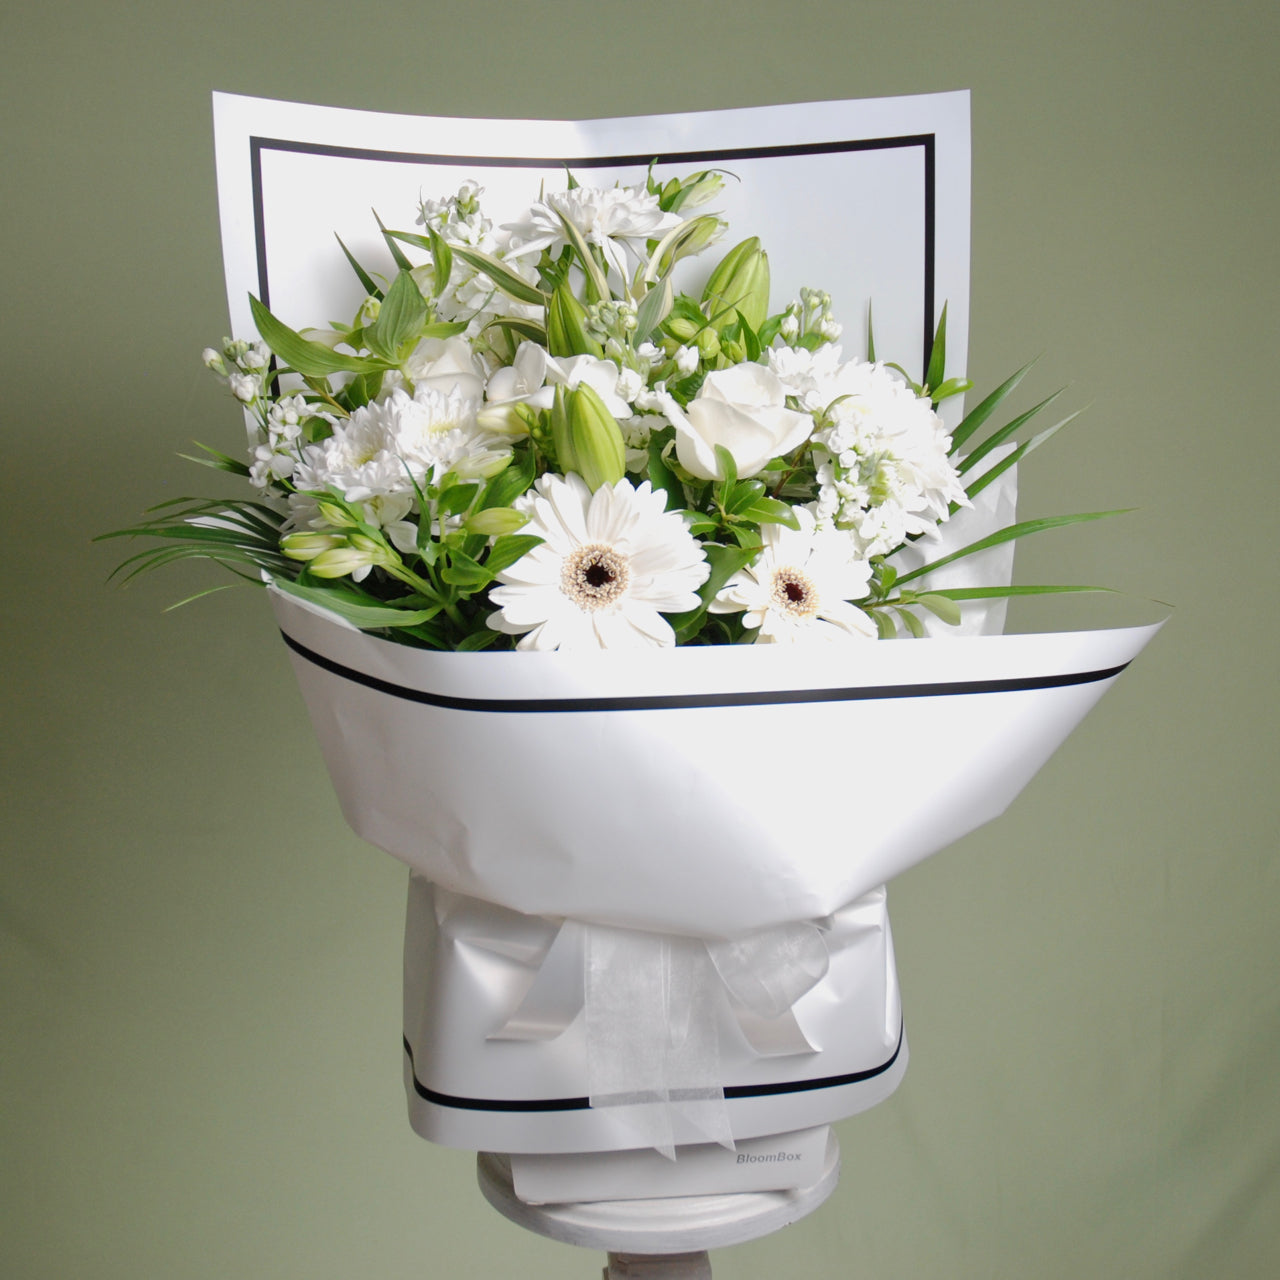 Cool White Vox - Bouquet of white and green flowers in a Water-filled box